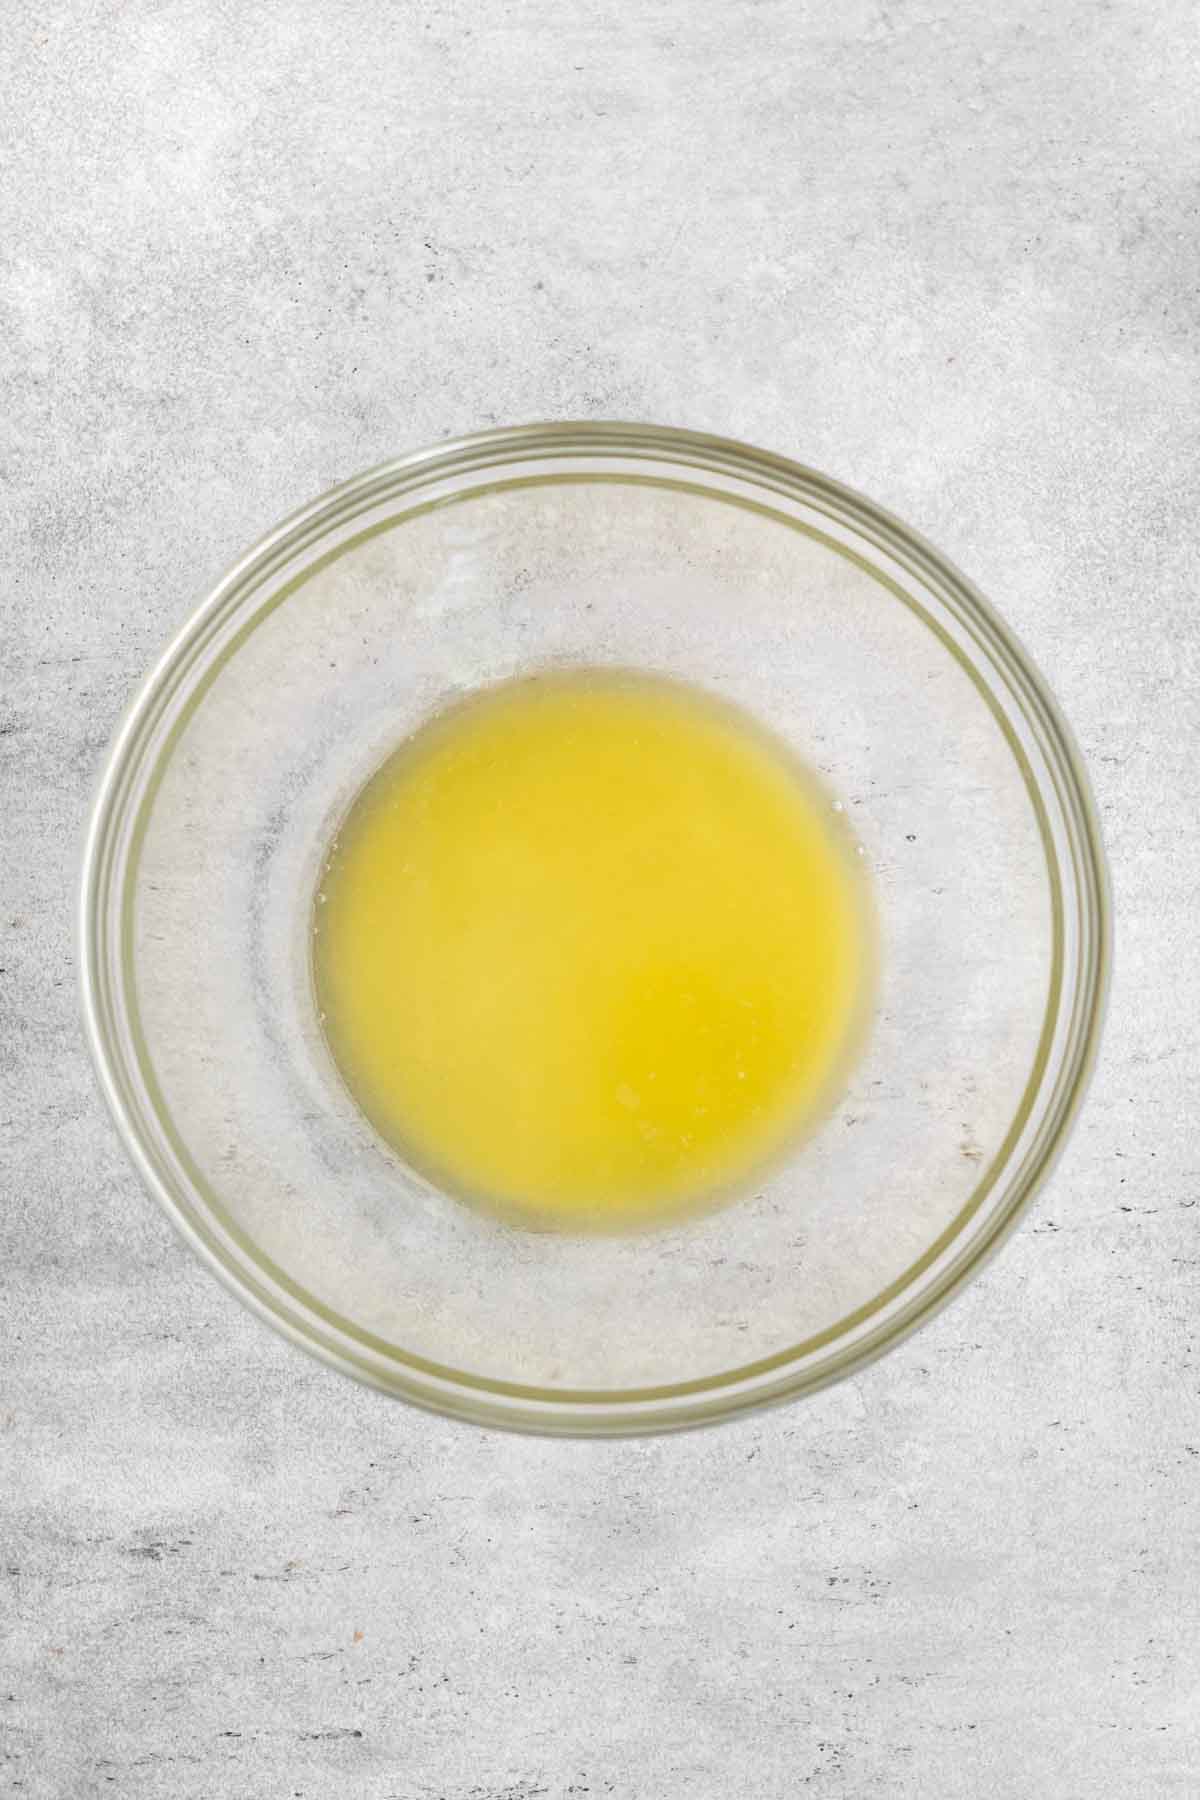 A bowl of melted butter.